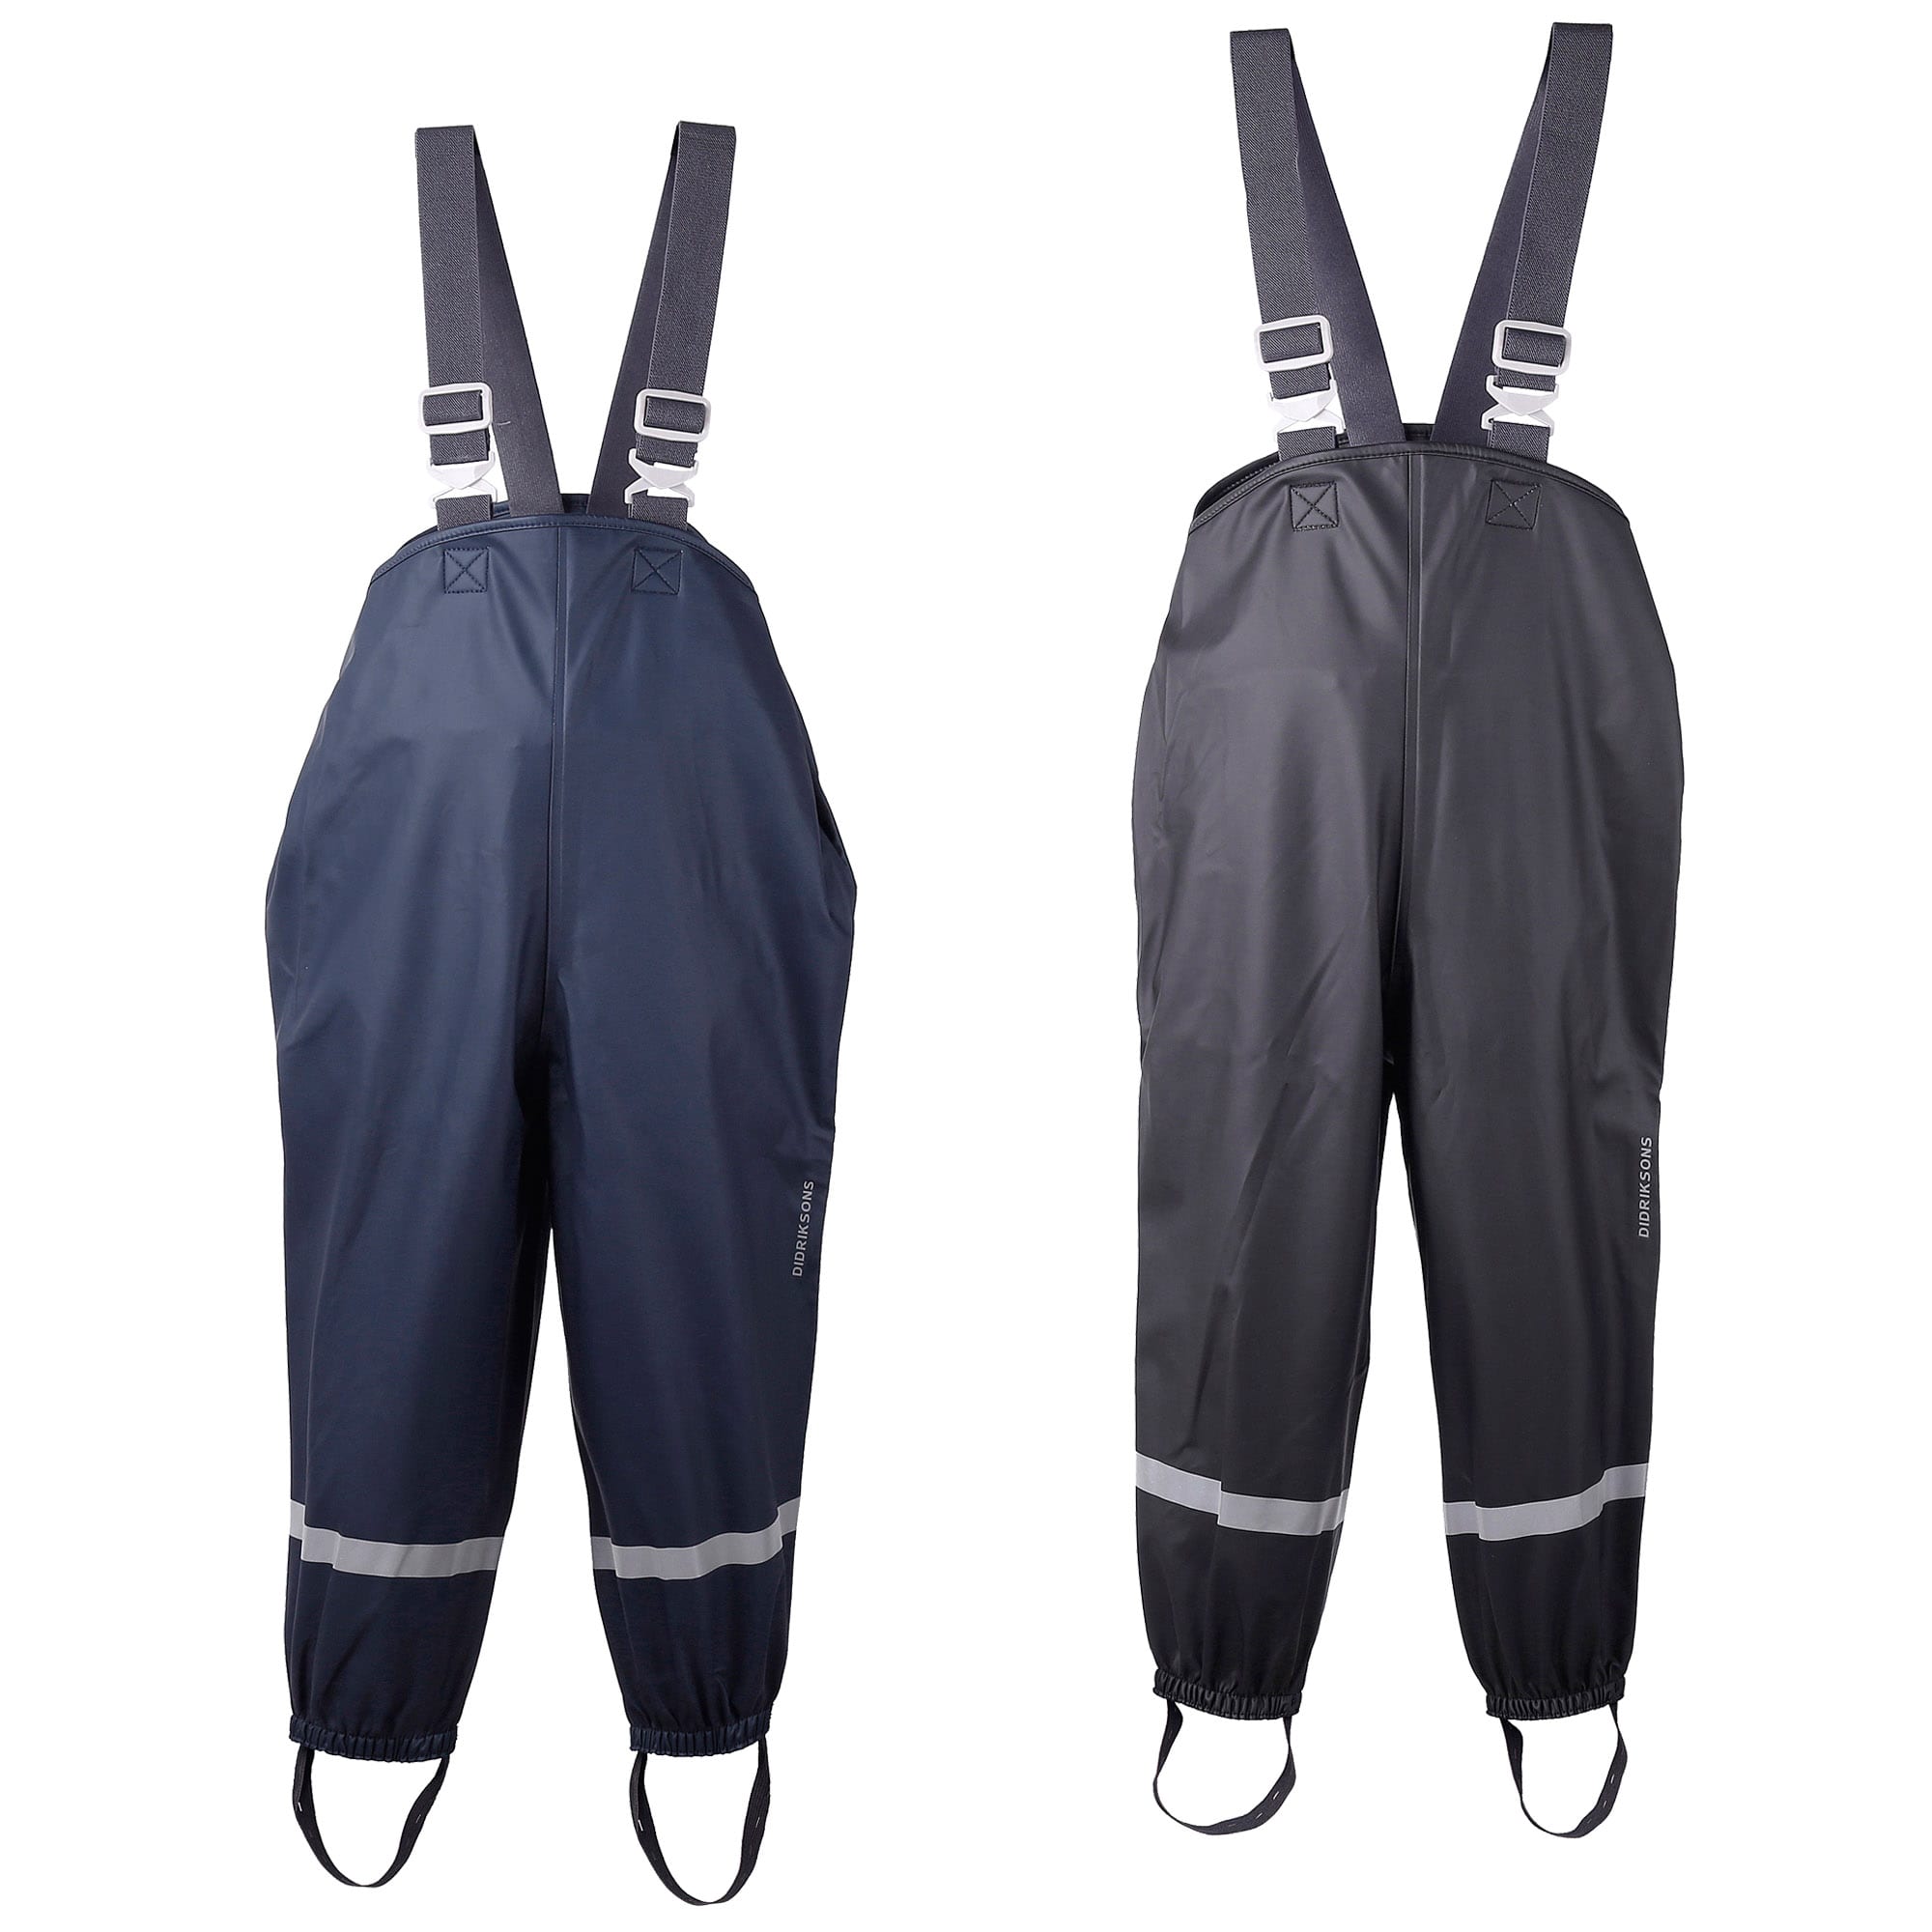 Buy Waterproof Trousers 9mths7yrs from the Next UK online shop